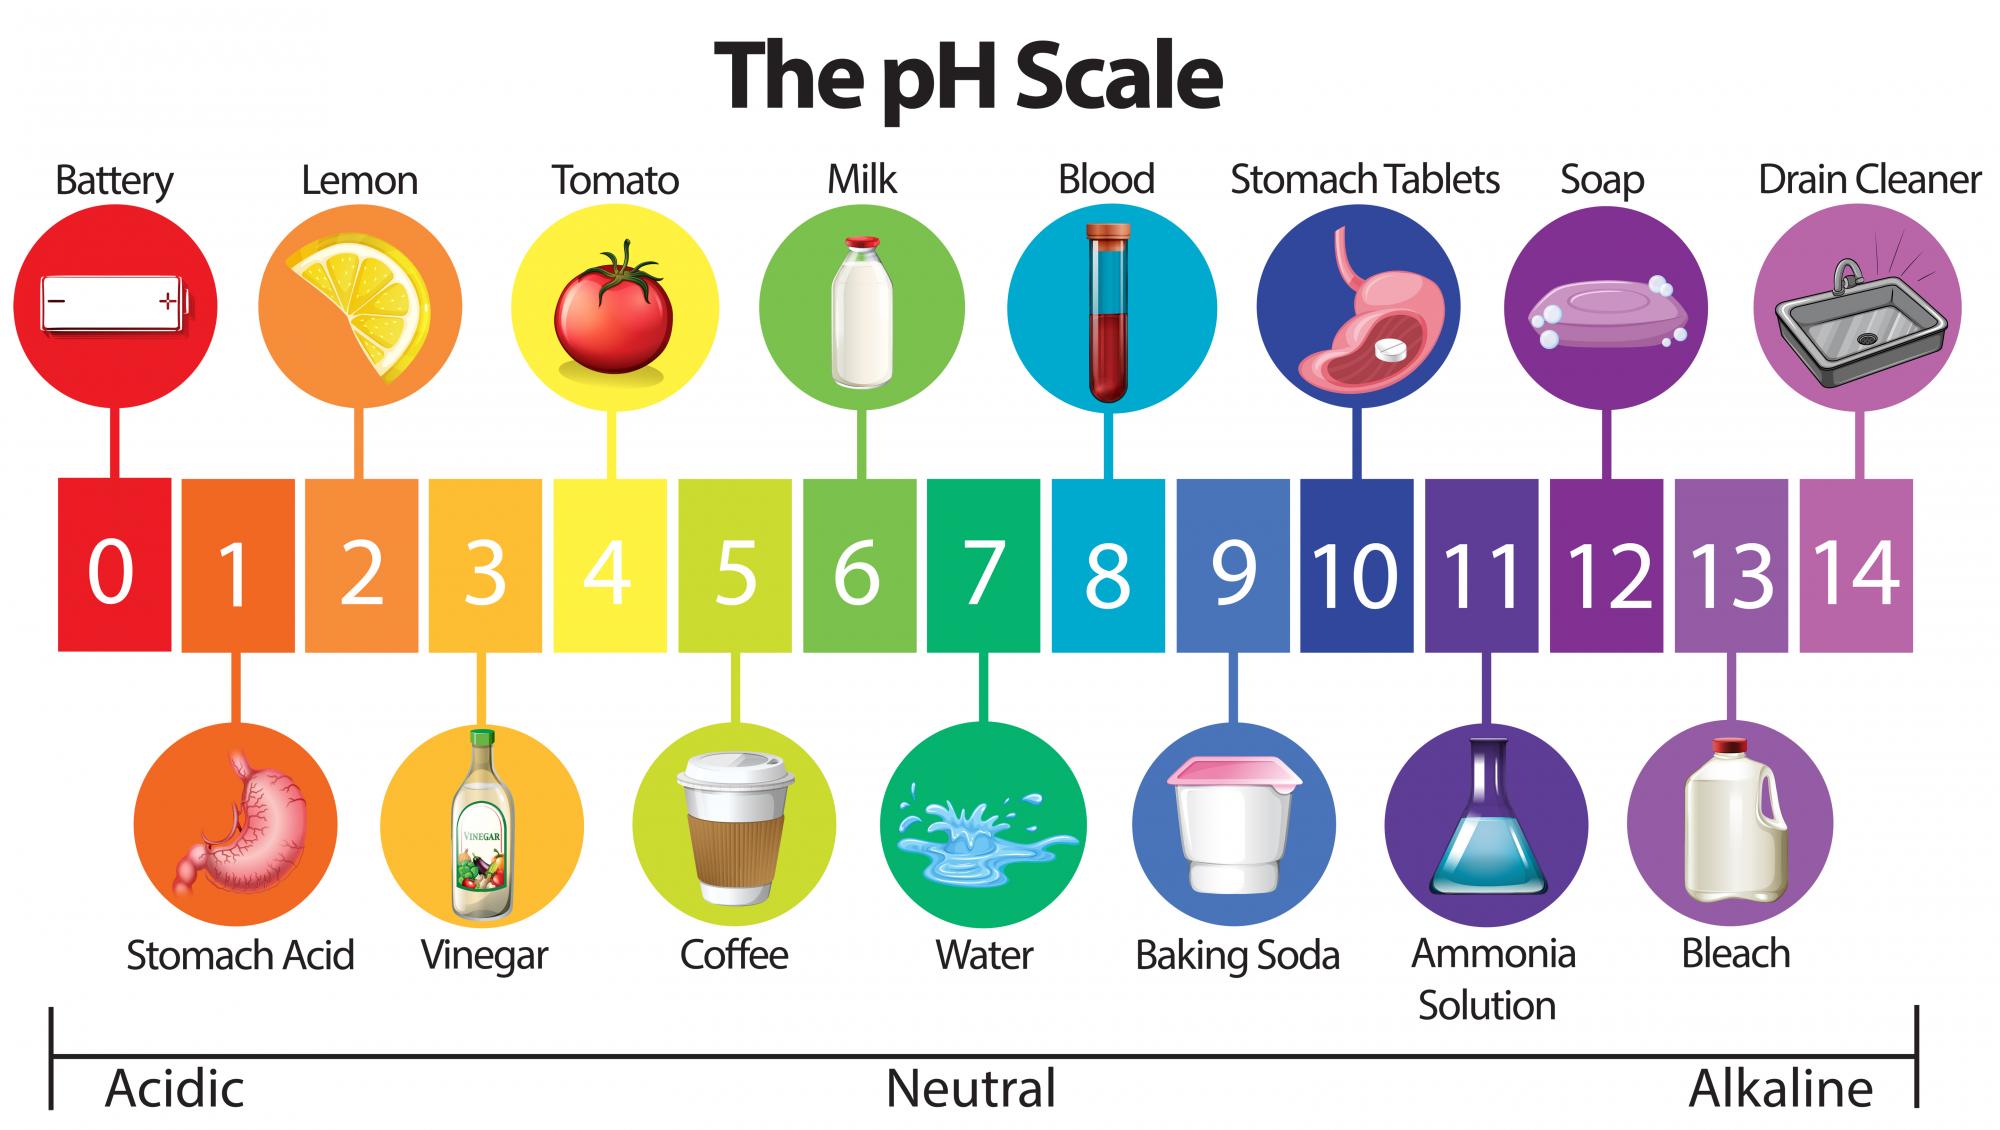 Do you know the pH of your shampoo? Why shampoo pH is critical for healthy, shiny hair.